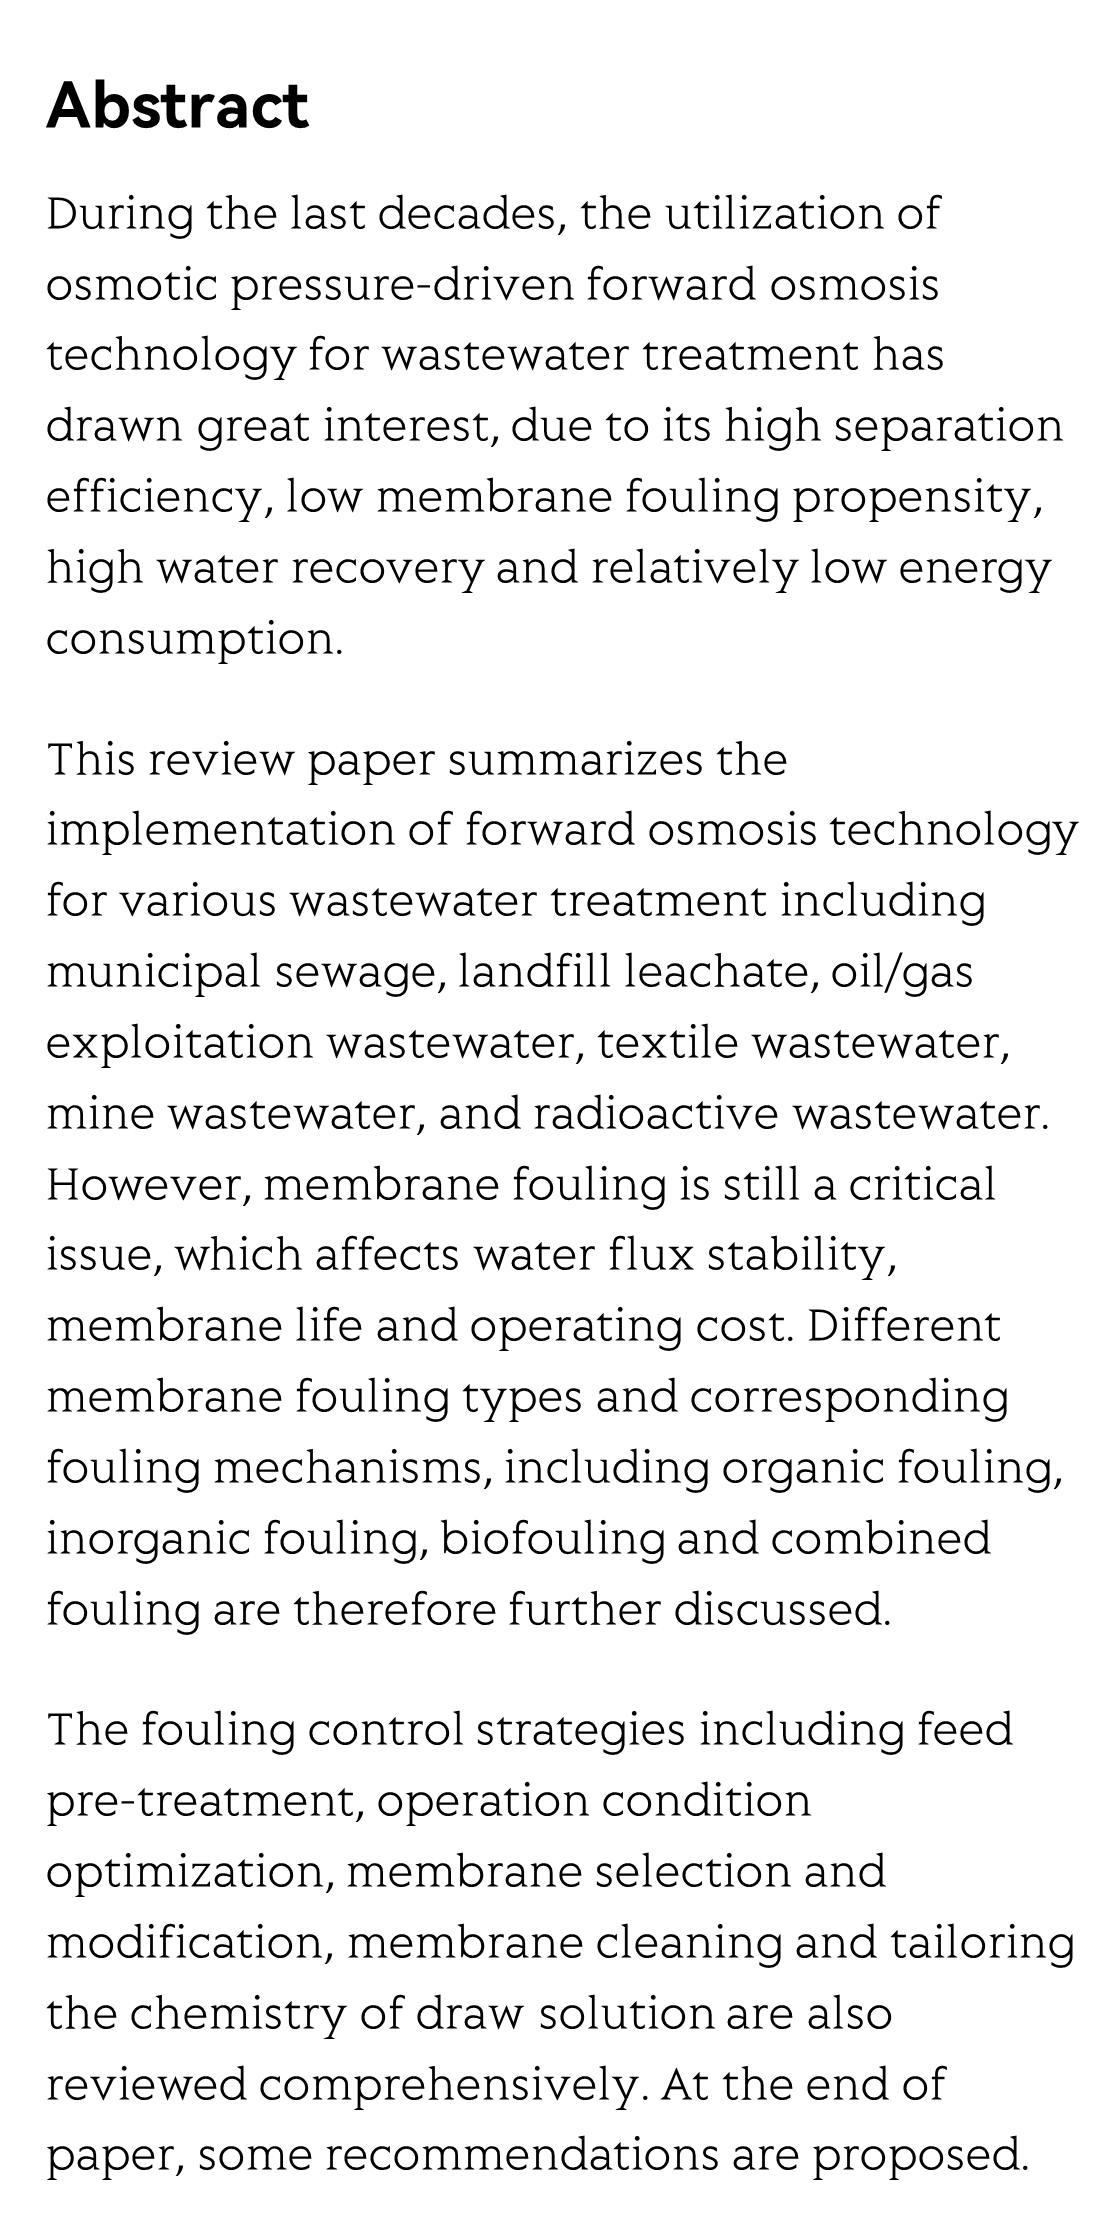 A review on the forward osmosis applications and fouling control strategies for wastewater treatment_2